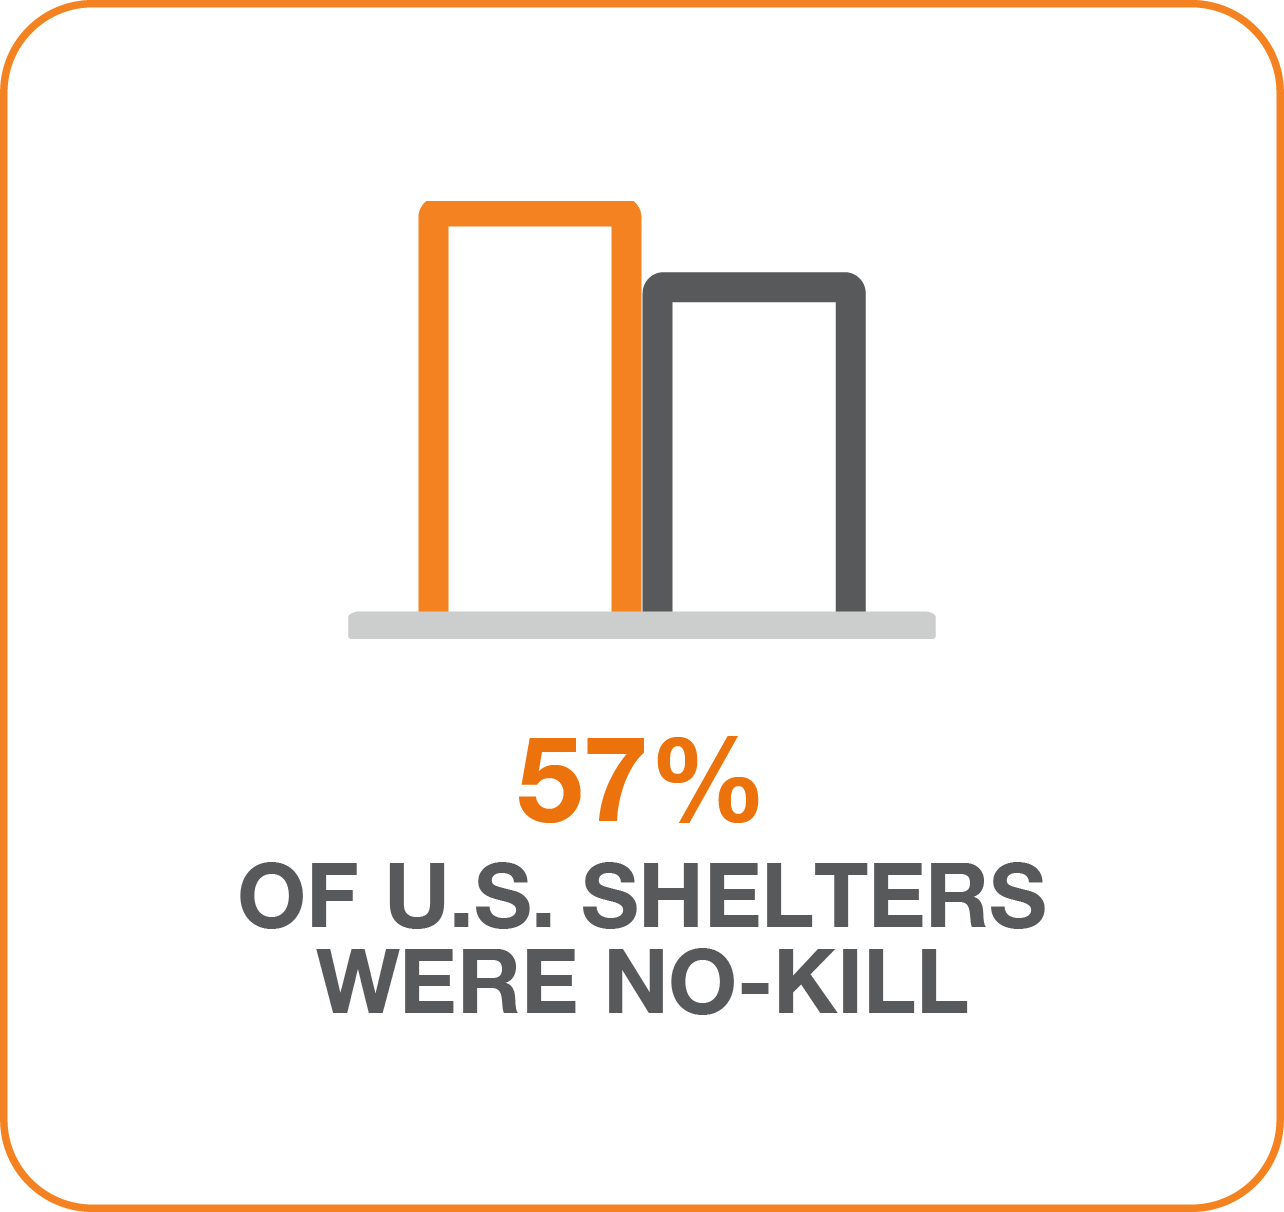 Percentage of No-Kill Shelters statistic